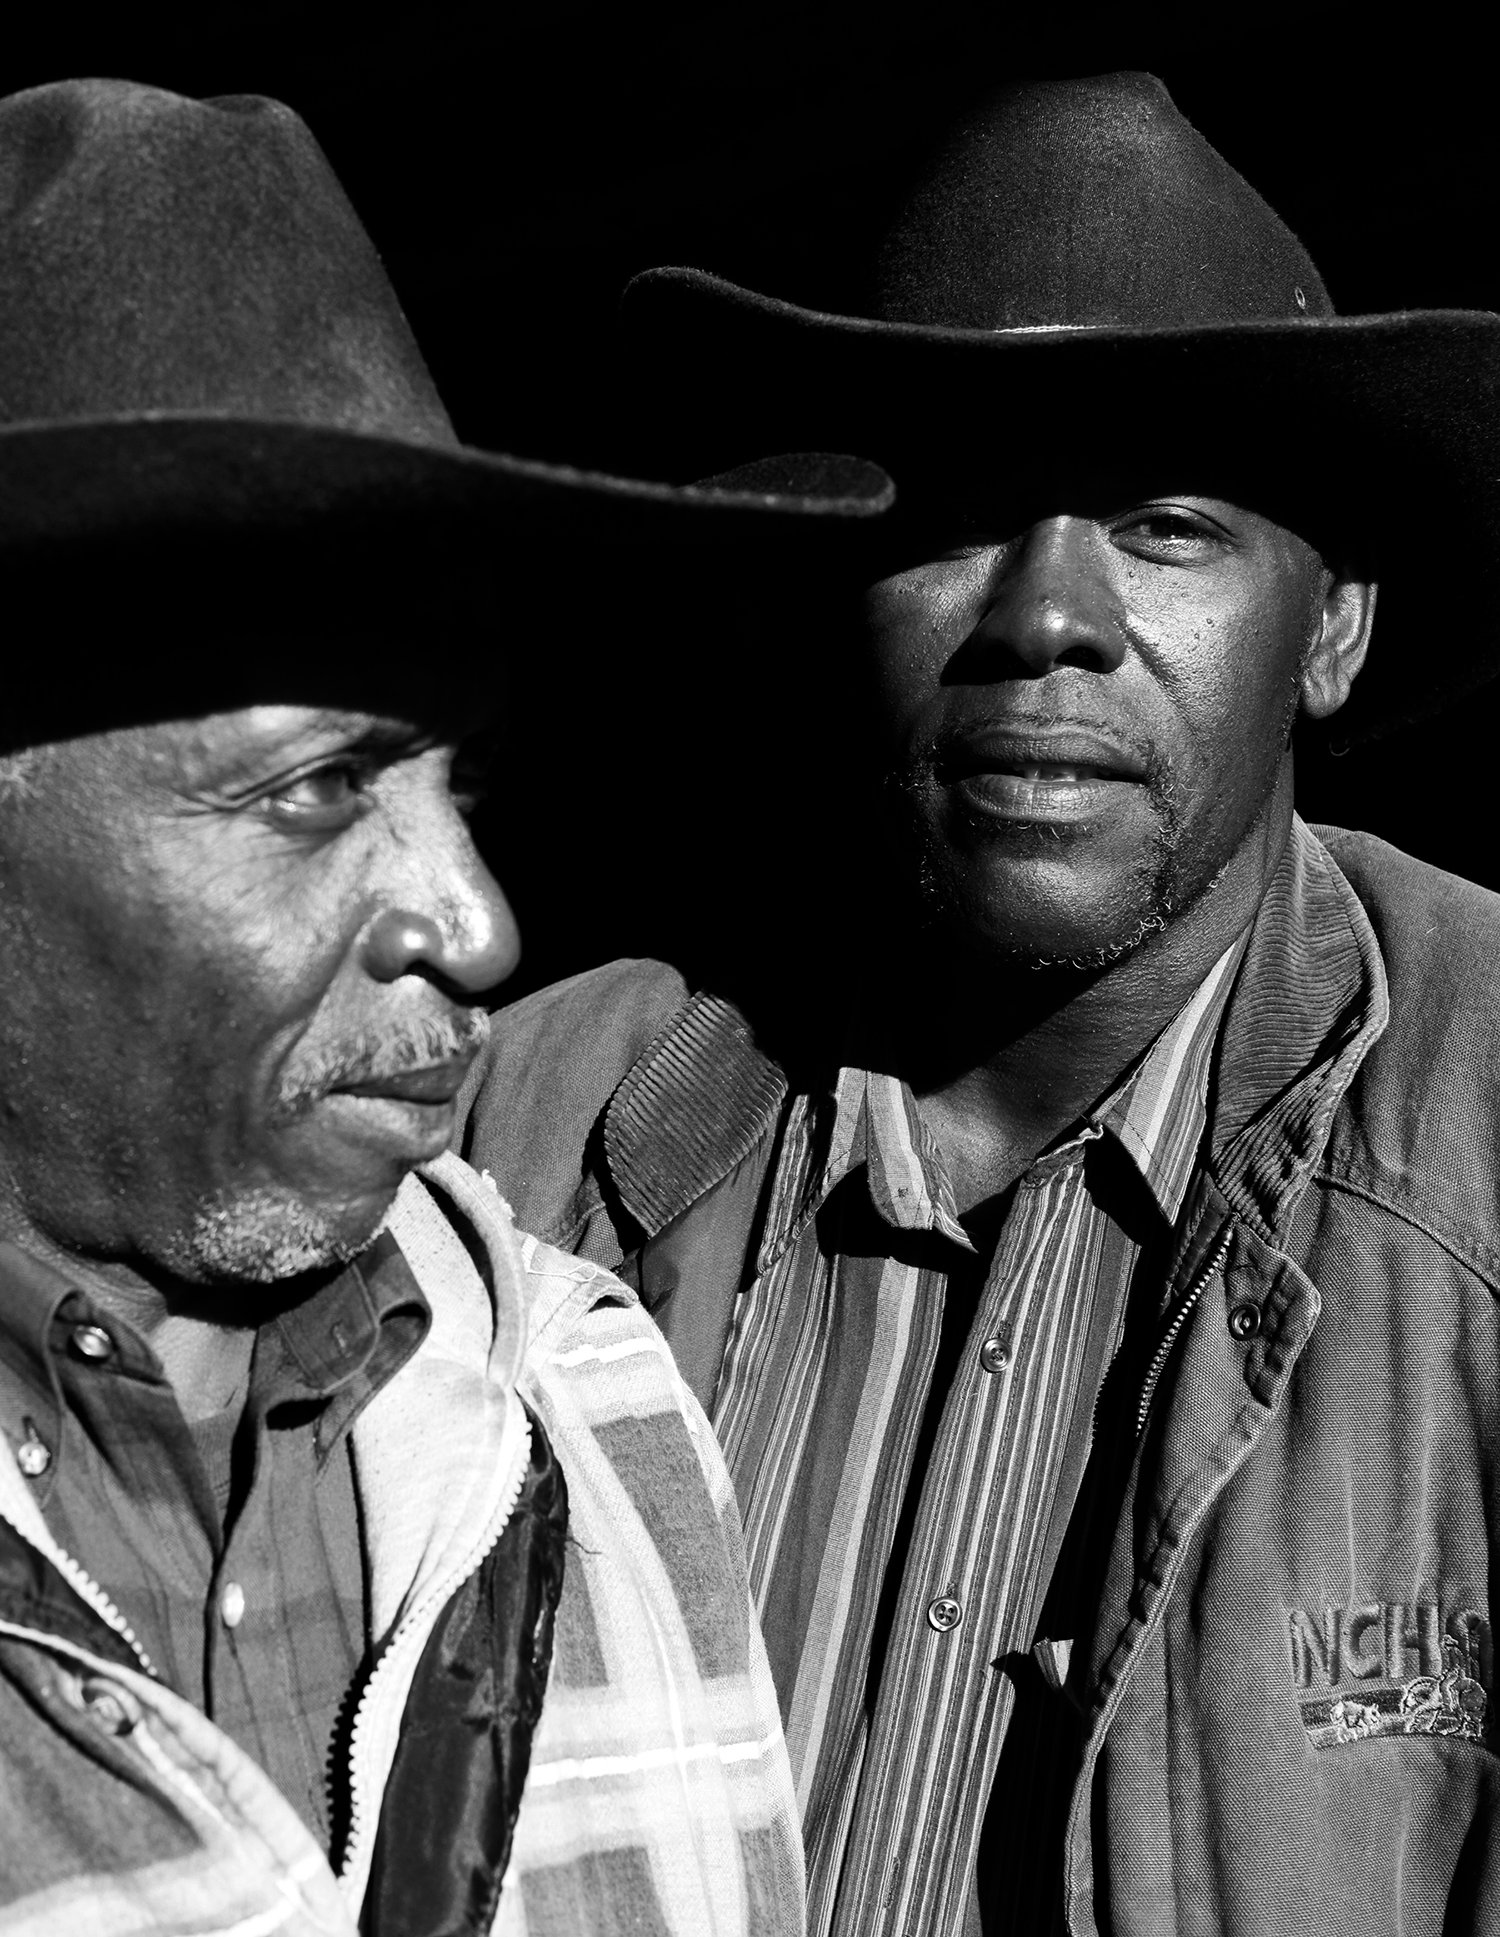 Image of Cowboys. Fort Worth, Texas. 2009